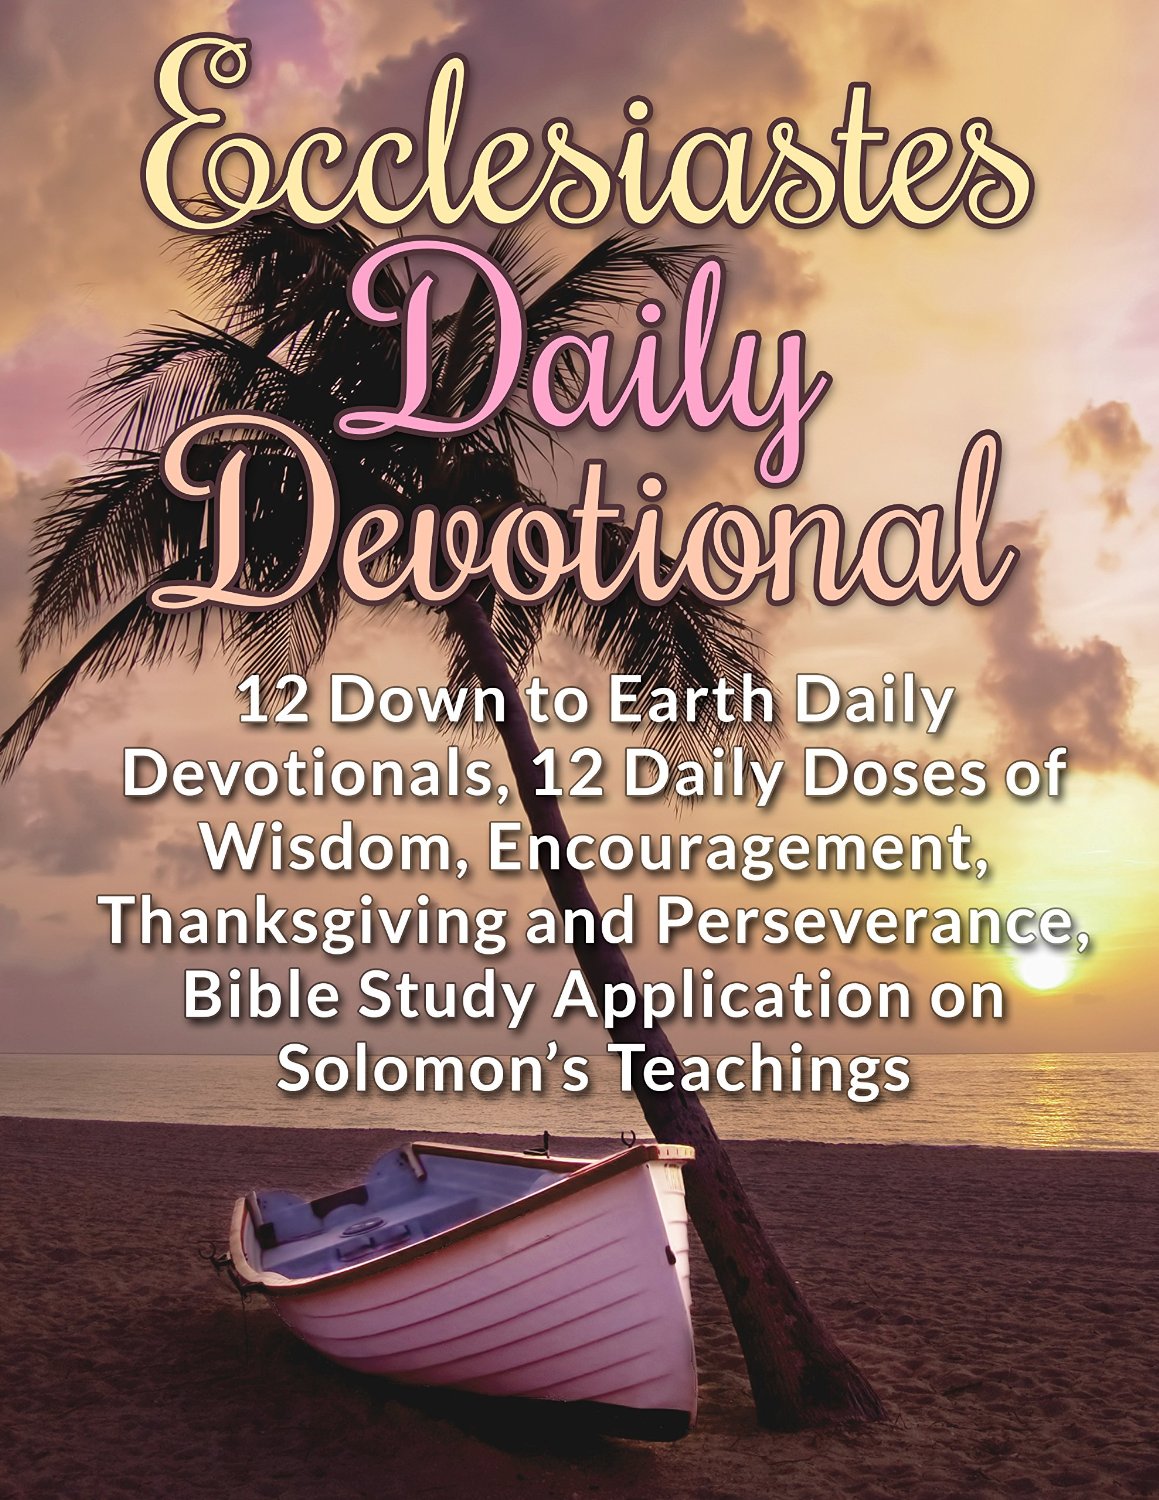 Ecclesiastes Daily Devotional: 12 Down to Earth Daily Devotionals, 12 Daily Doses of Wisdom, Encouragement, Thanksgiving and Perseverance, Bible Study Application on Solomon’s Teachings by Gary Wong